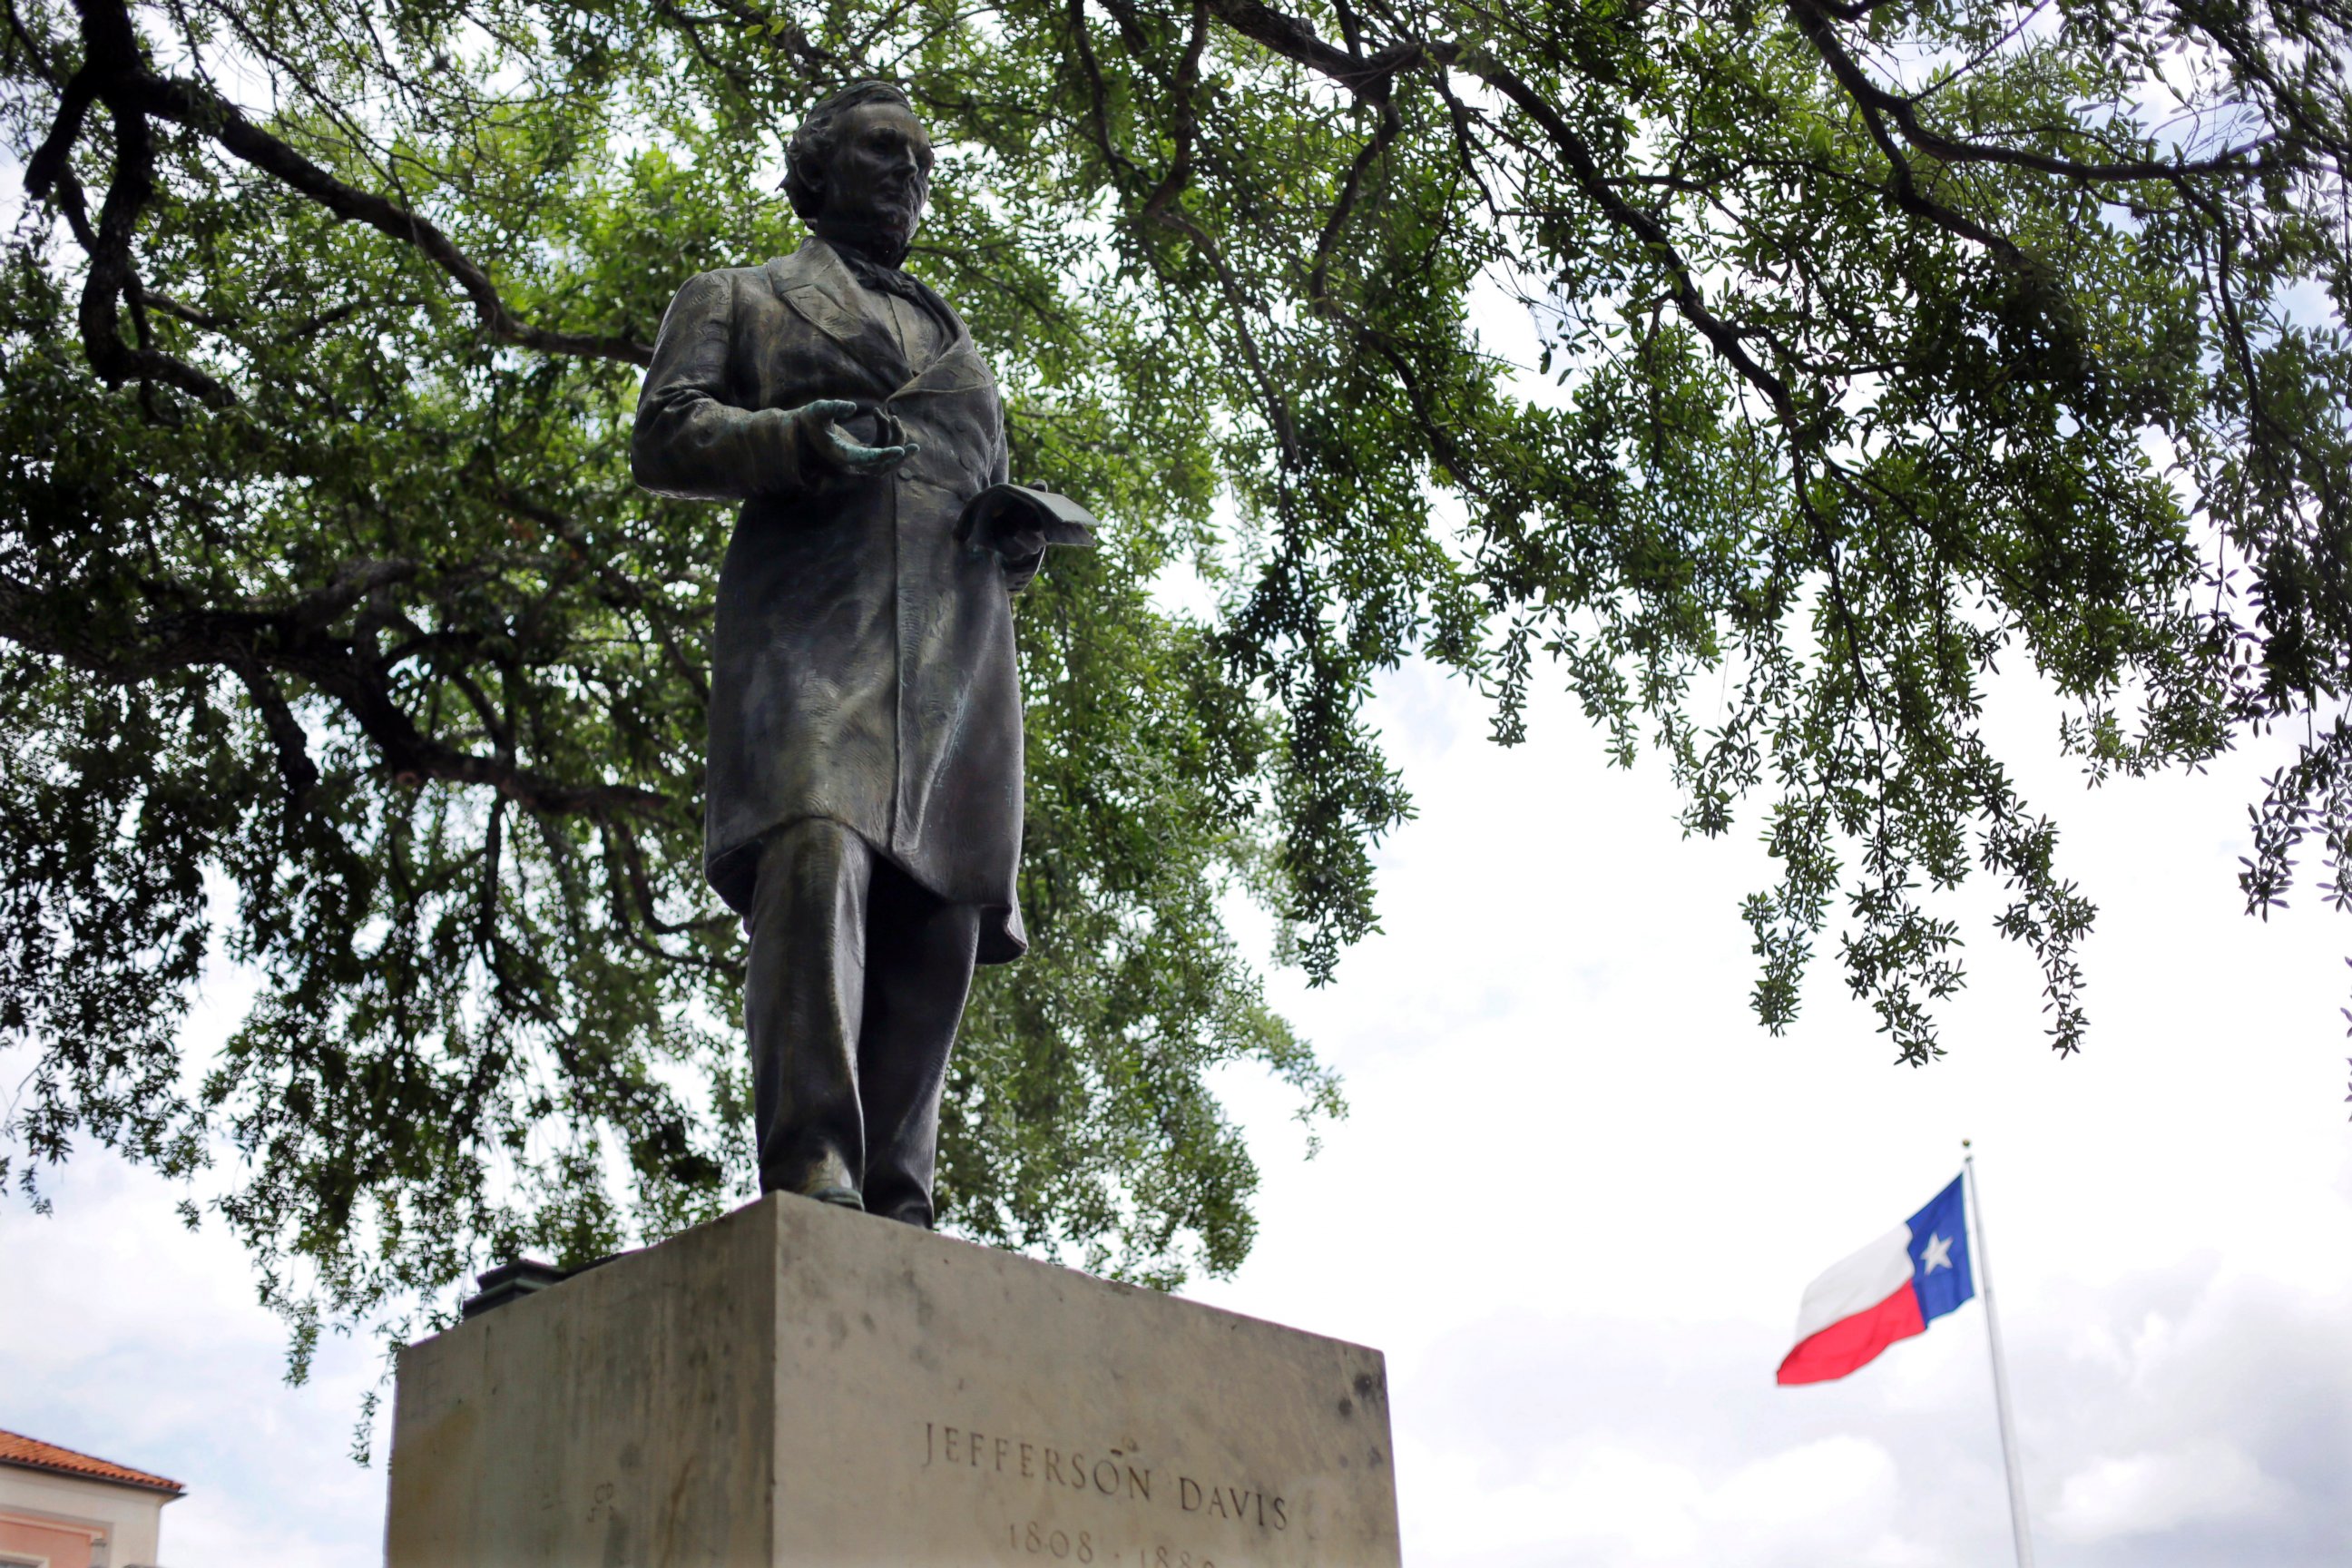 PHOTO: In this May 5, 2015 file photo, a statue of Jefferson Davis is seen on the University of Texas campus in Austin, Texas.